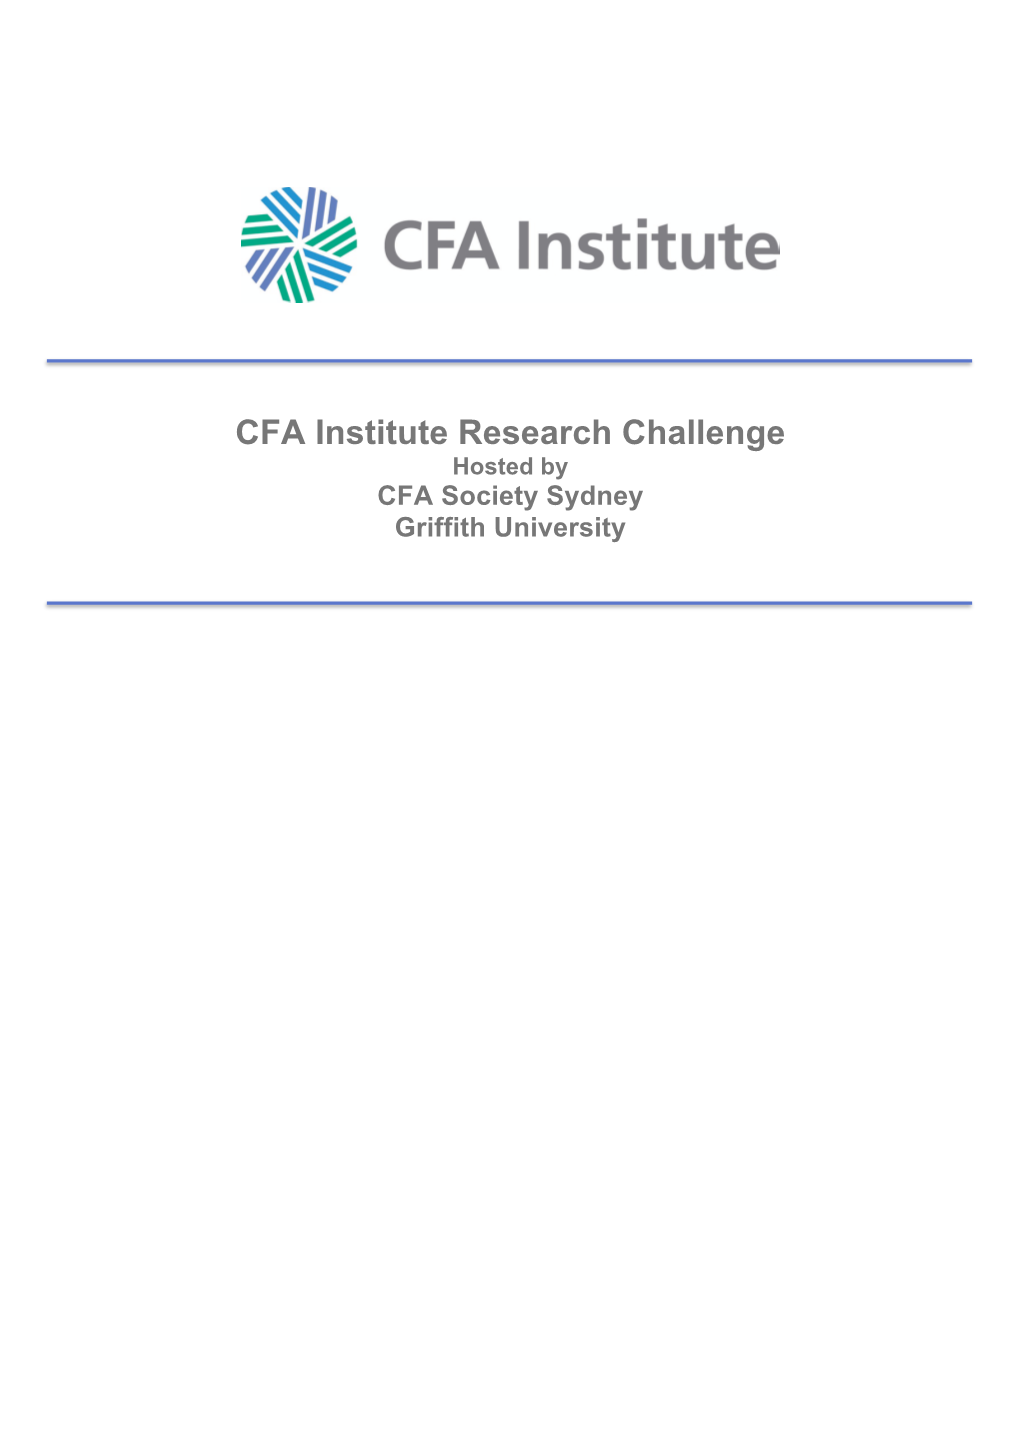 CFA Institute Research Challenge Hosted by CFA Society Sydney Griffith University